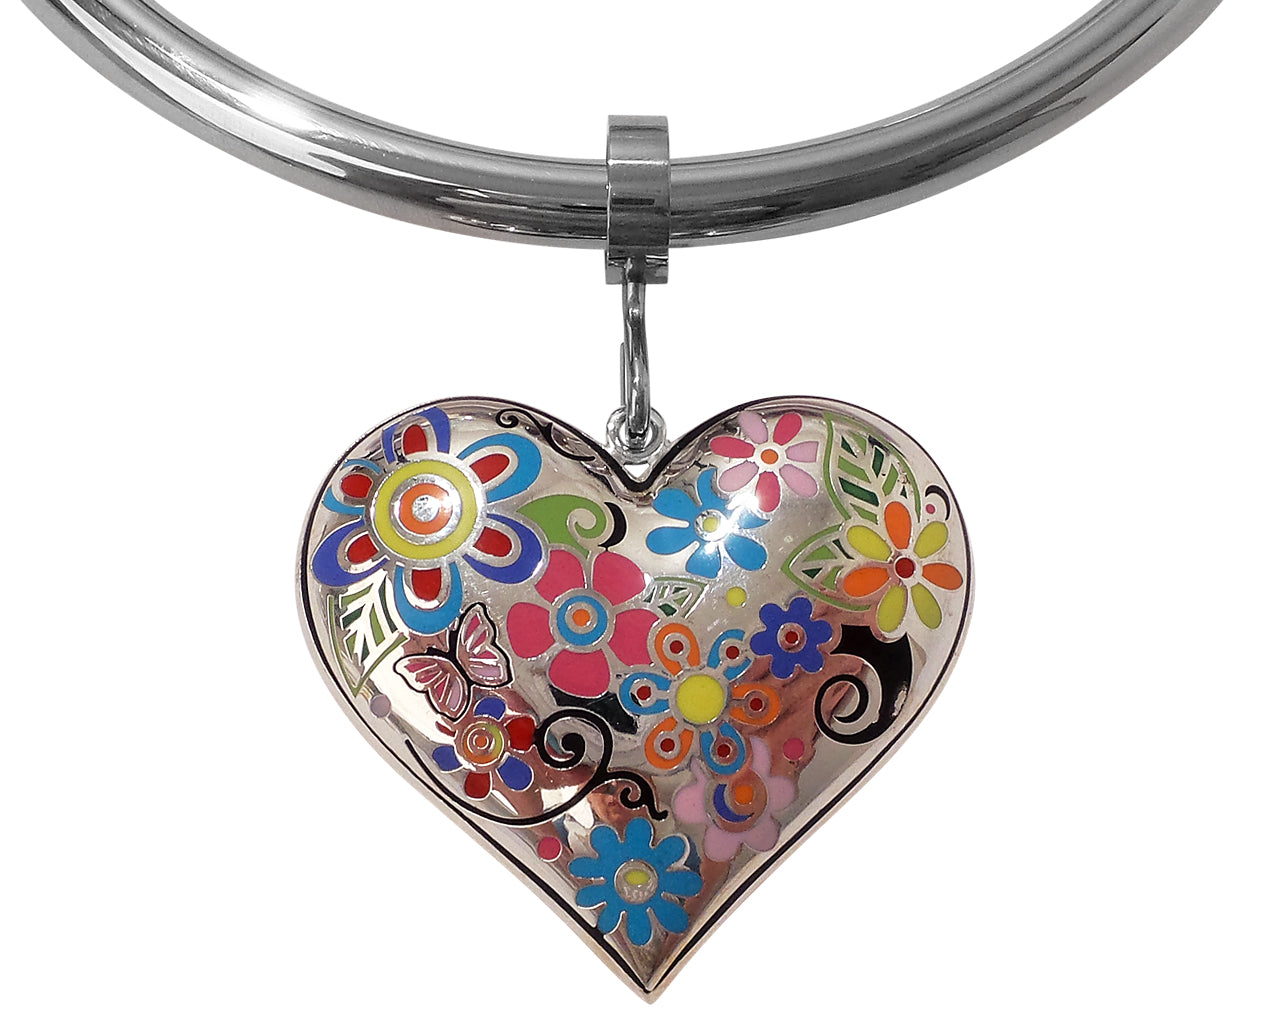 Colorful Heart Pendant with Floral Pattern